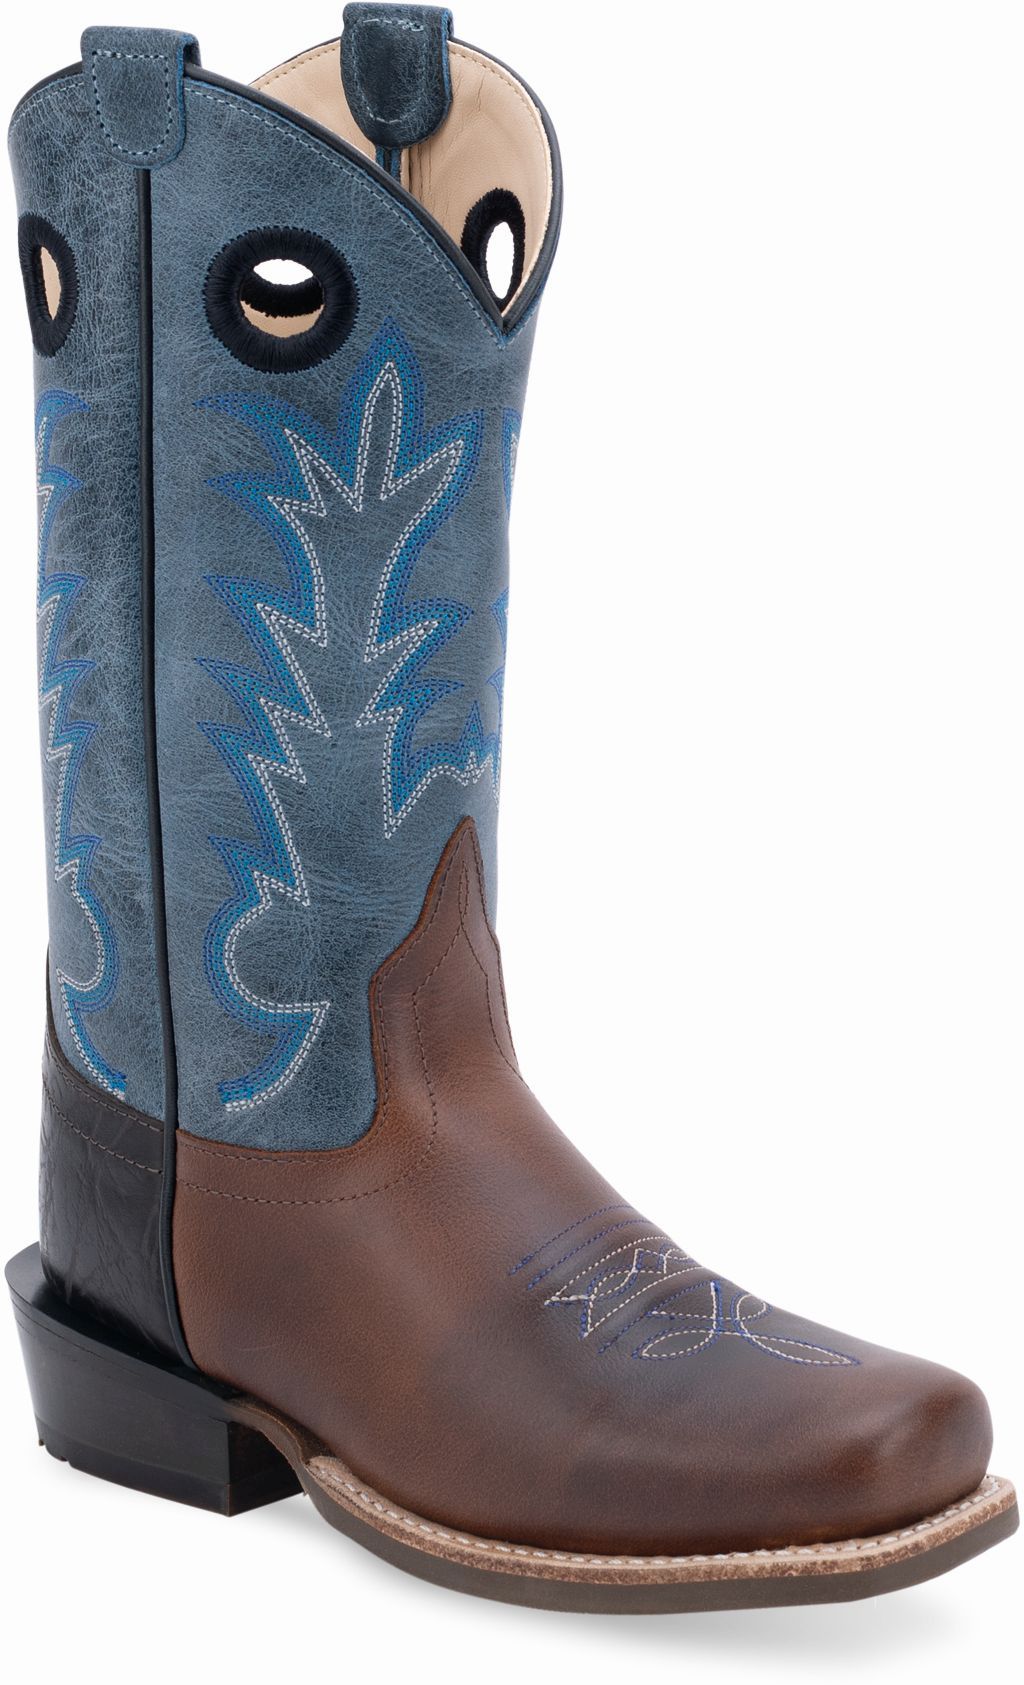 Old West Burnt Brown Foot with Printed Black Counter Milled Crunchy Blue Shaft Youth's Medium Square Toe Boots